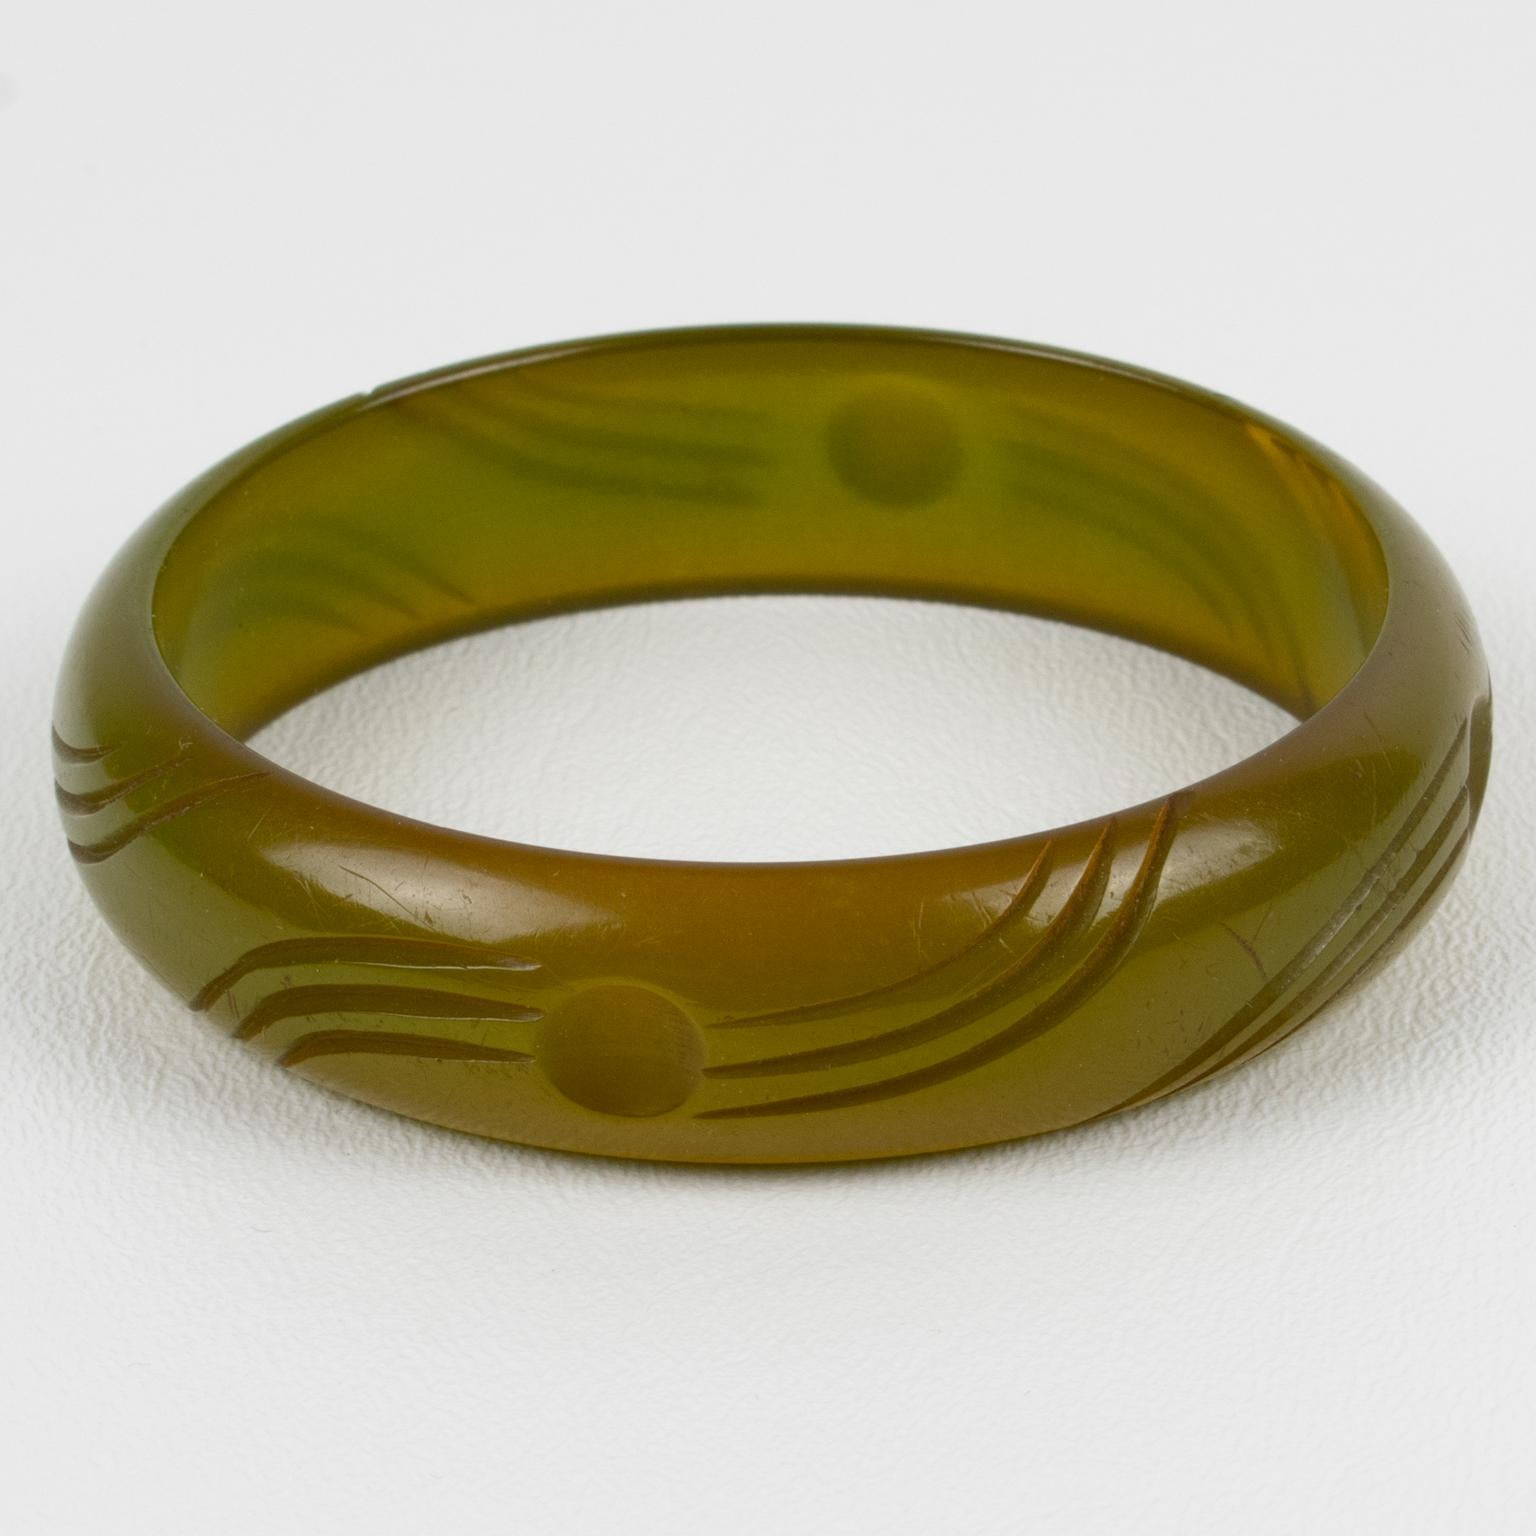 This is a stunning asparagus green Bakelite carved bracelet bangle. It features a spacer domed shape with deep geometric carving all around. The color is an intense green tone with a yellow-orange overtone and light transparency. 
The bracelet is in